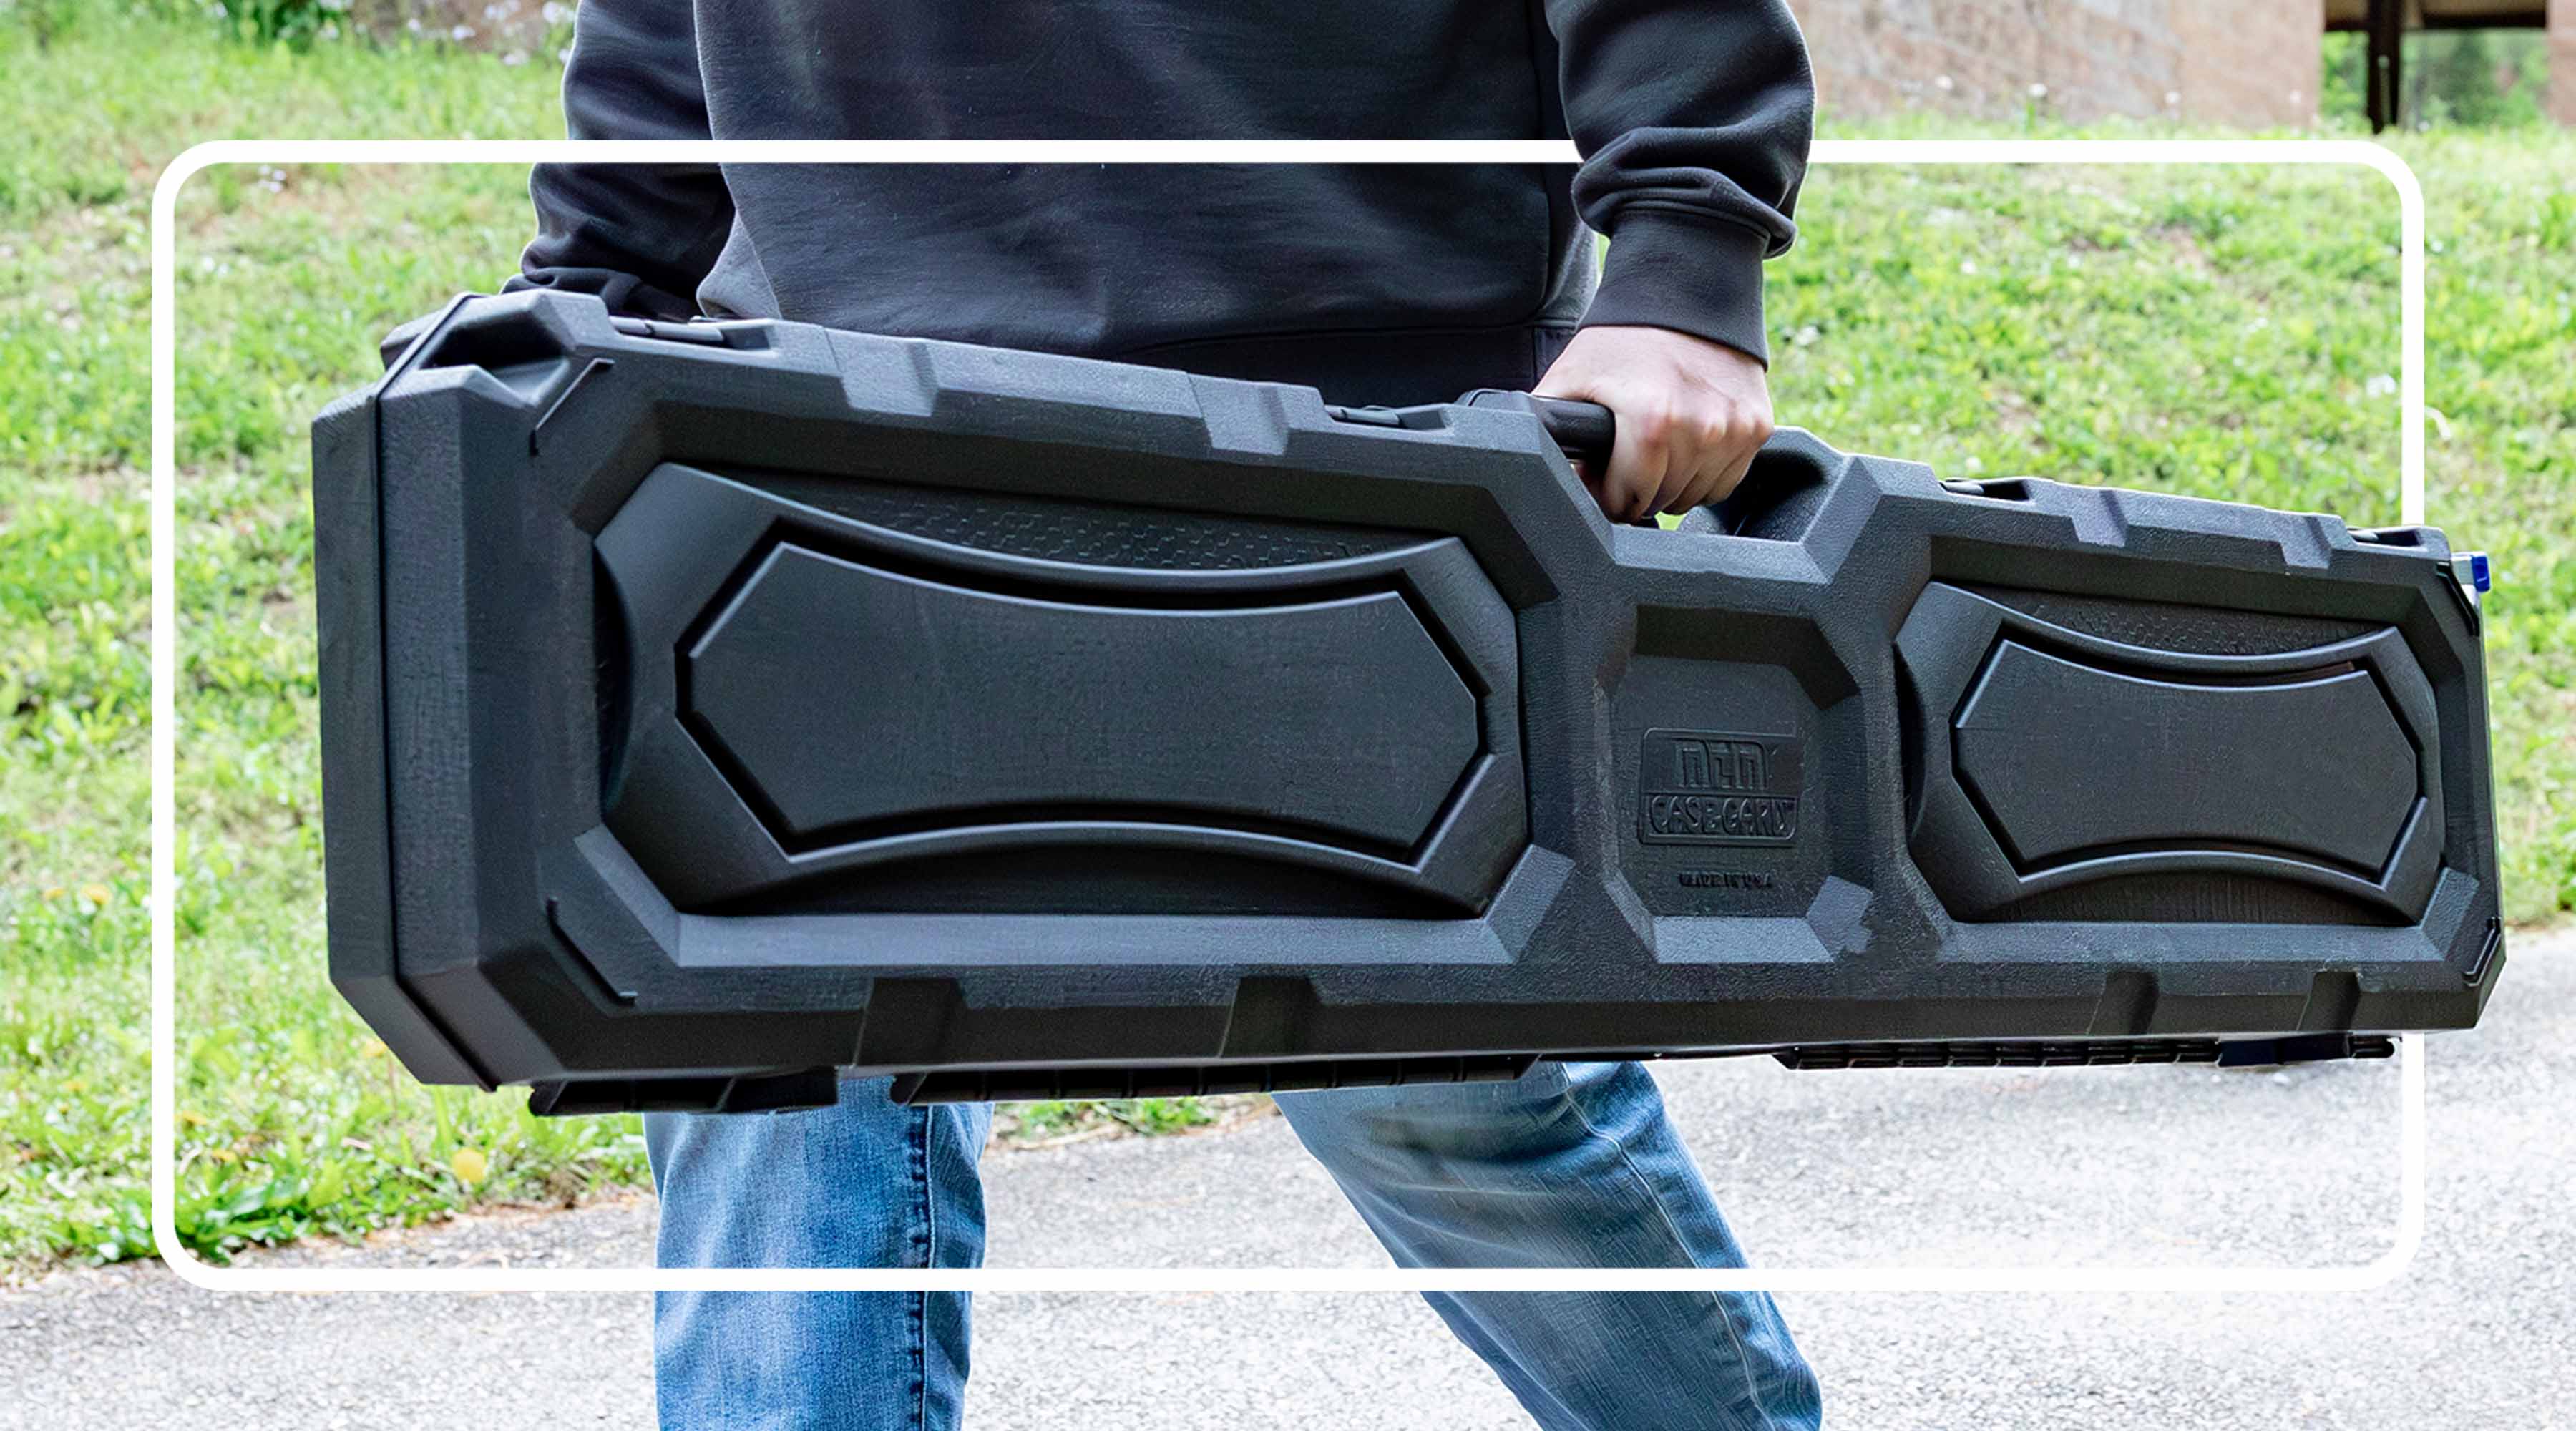 Safeguarding Your Firearms: The Benefits of MTM Case-Gard's Gun Cases for Your Rifles